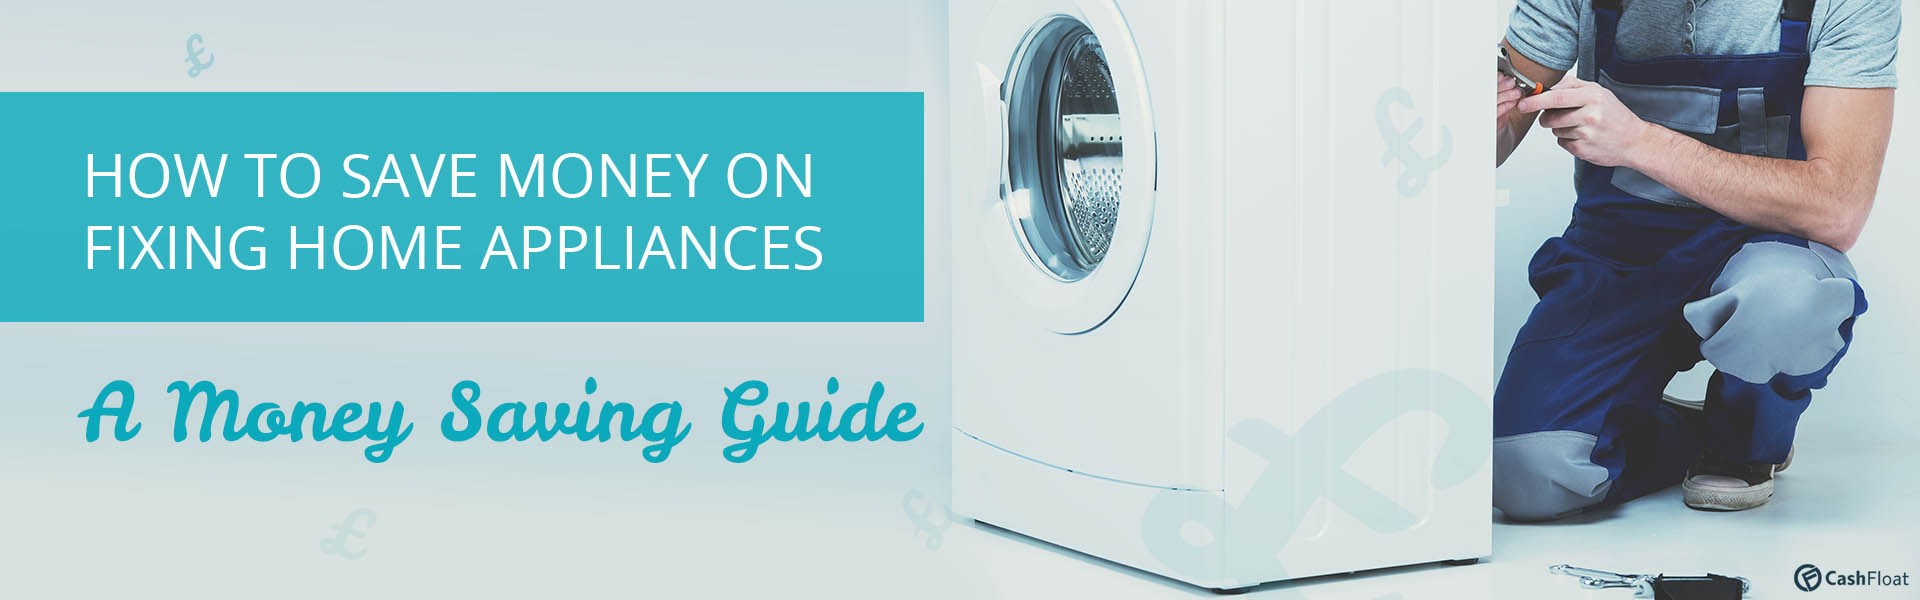 How To Save Money On Fixing Home Appliances - Cashfloat